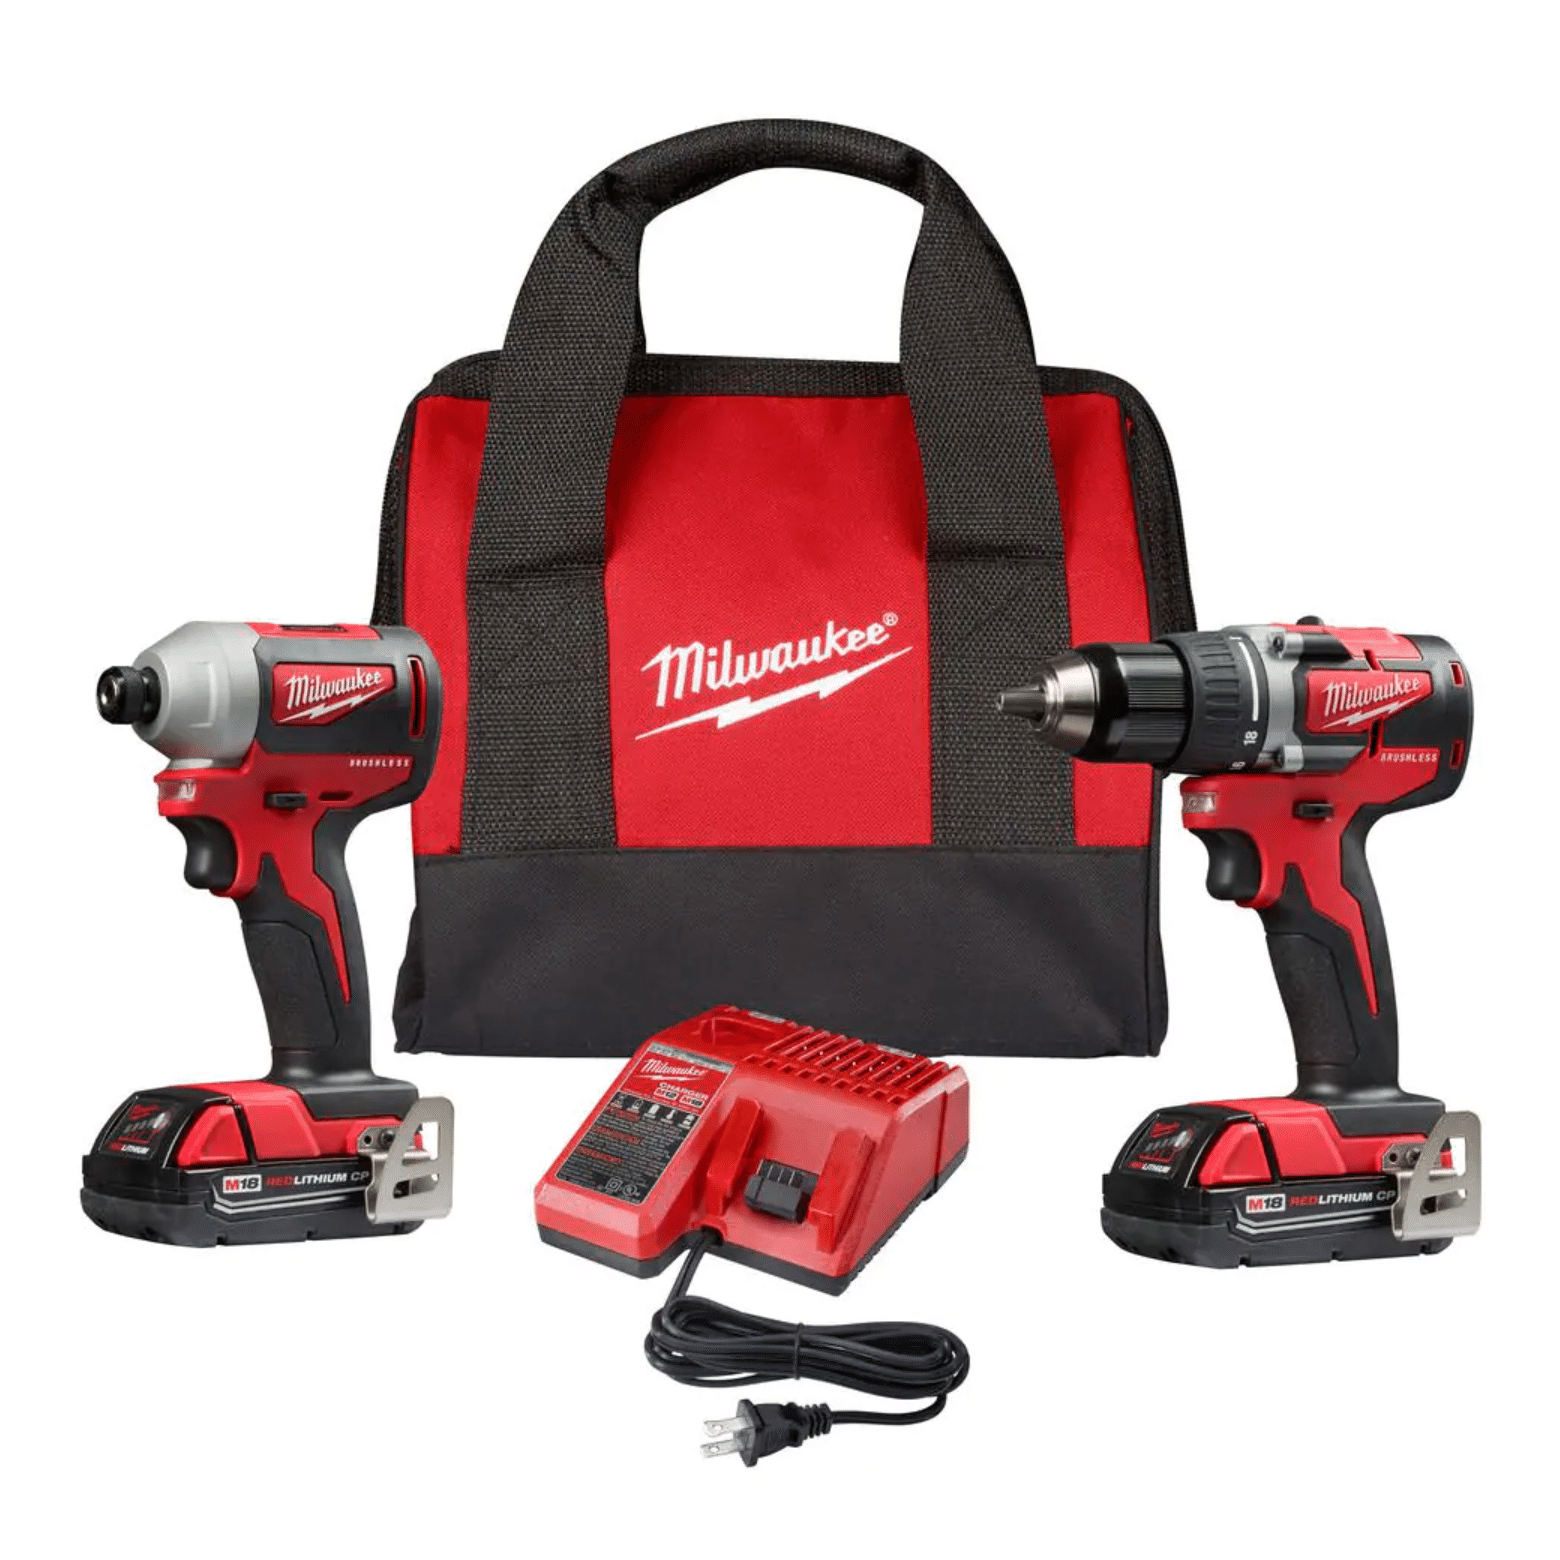 Milwaukee M18 18V Lithium-Ion Brushless Cordless Compact Drill/Impact Combo Kit (2-Tool) W/ (2) 2.0Ah Batteries, Charger & Bag (2892-22CT)